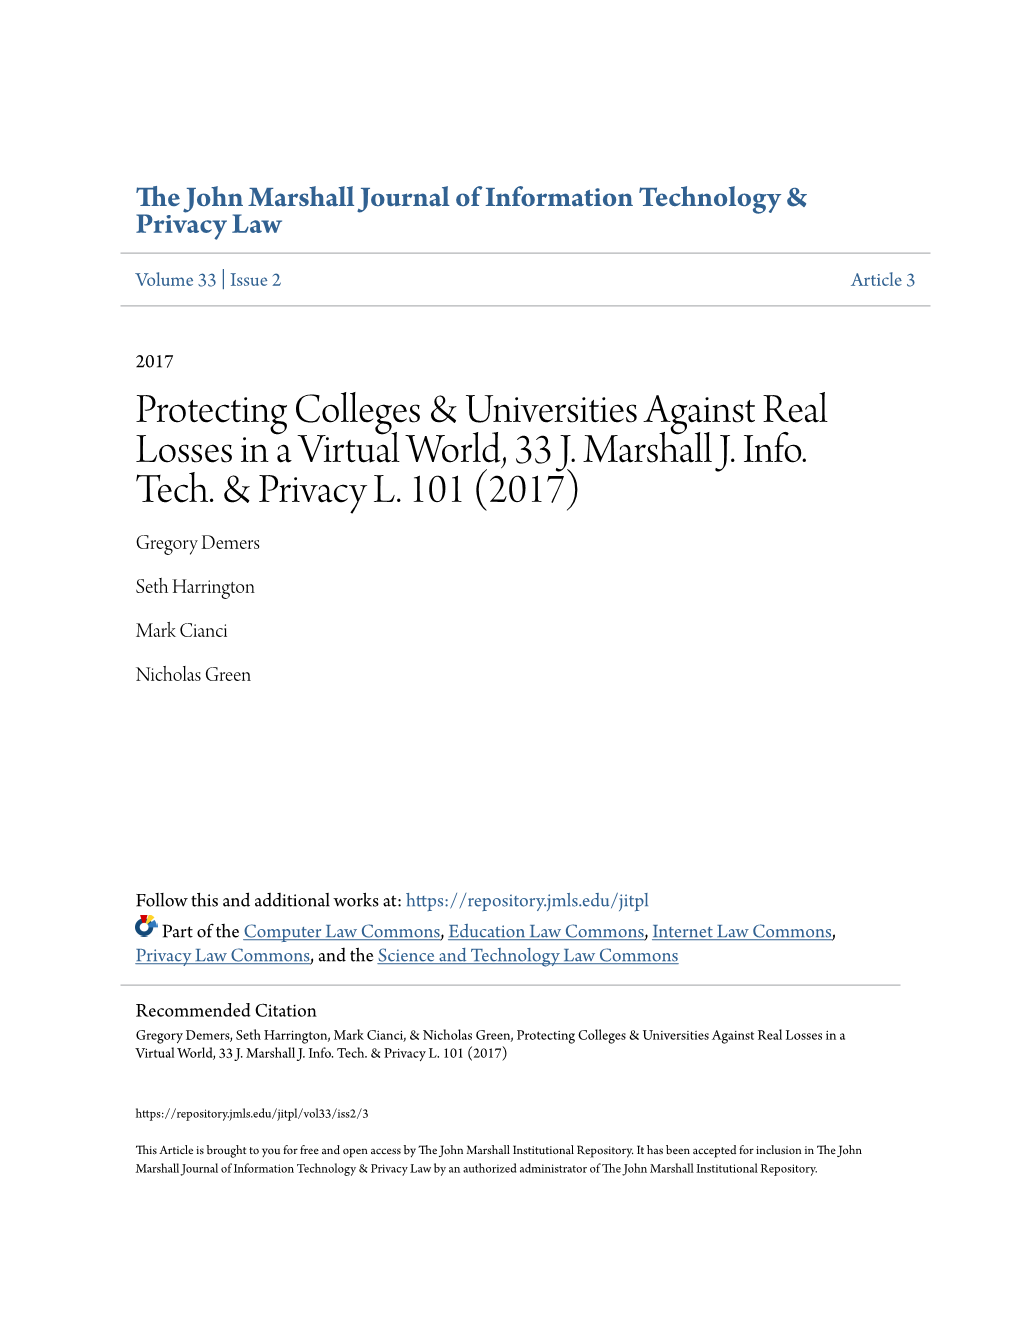 Protecting Colleges & Universities Against Real Losses in a Virtual World, 33 J. Marshall J. Info. Tech. & Privacy L. 10